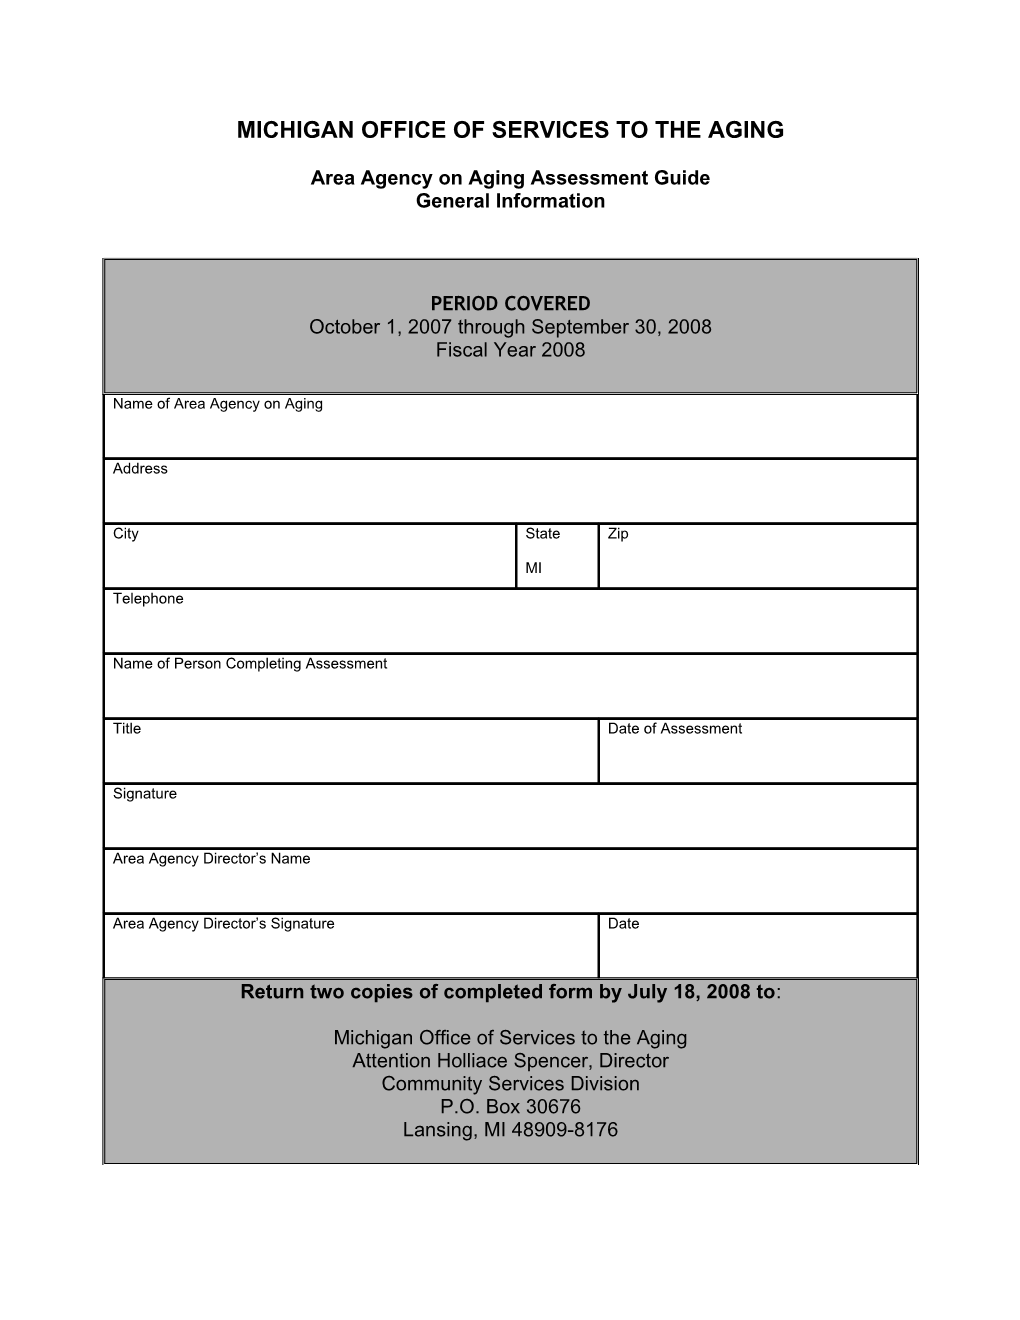 Area Agency on Aging Assessment Guide